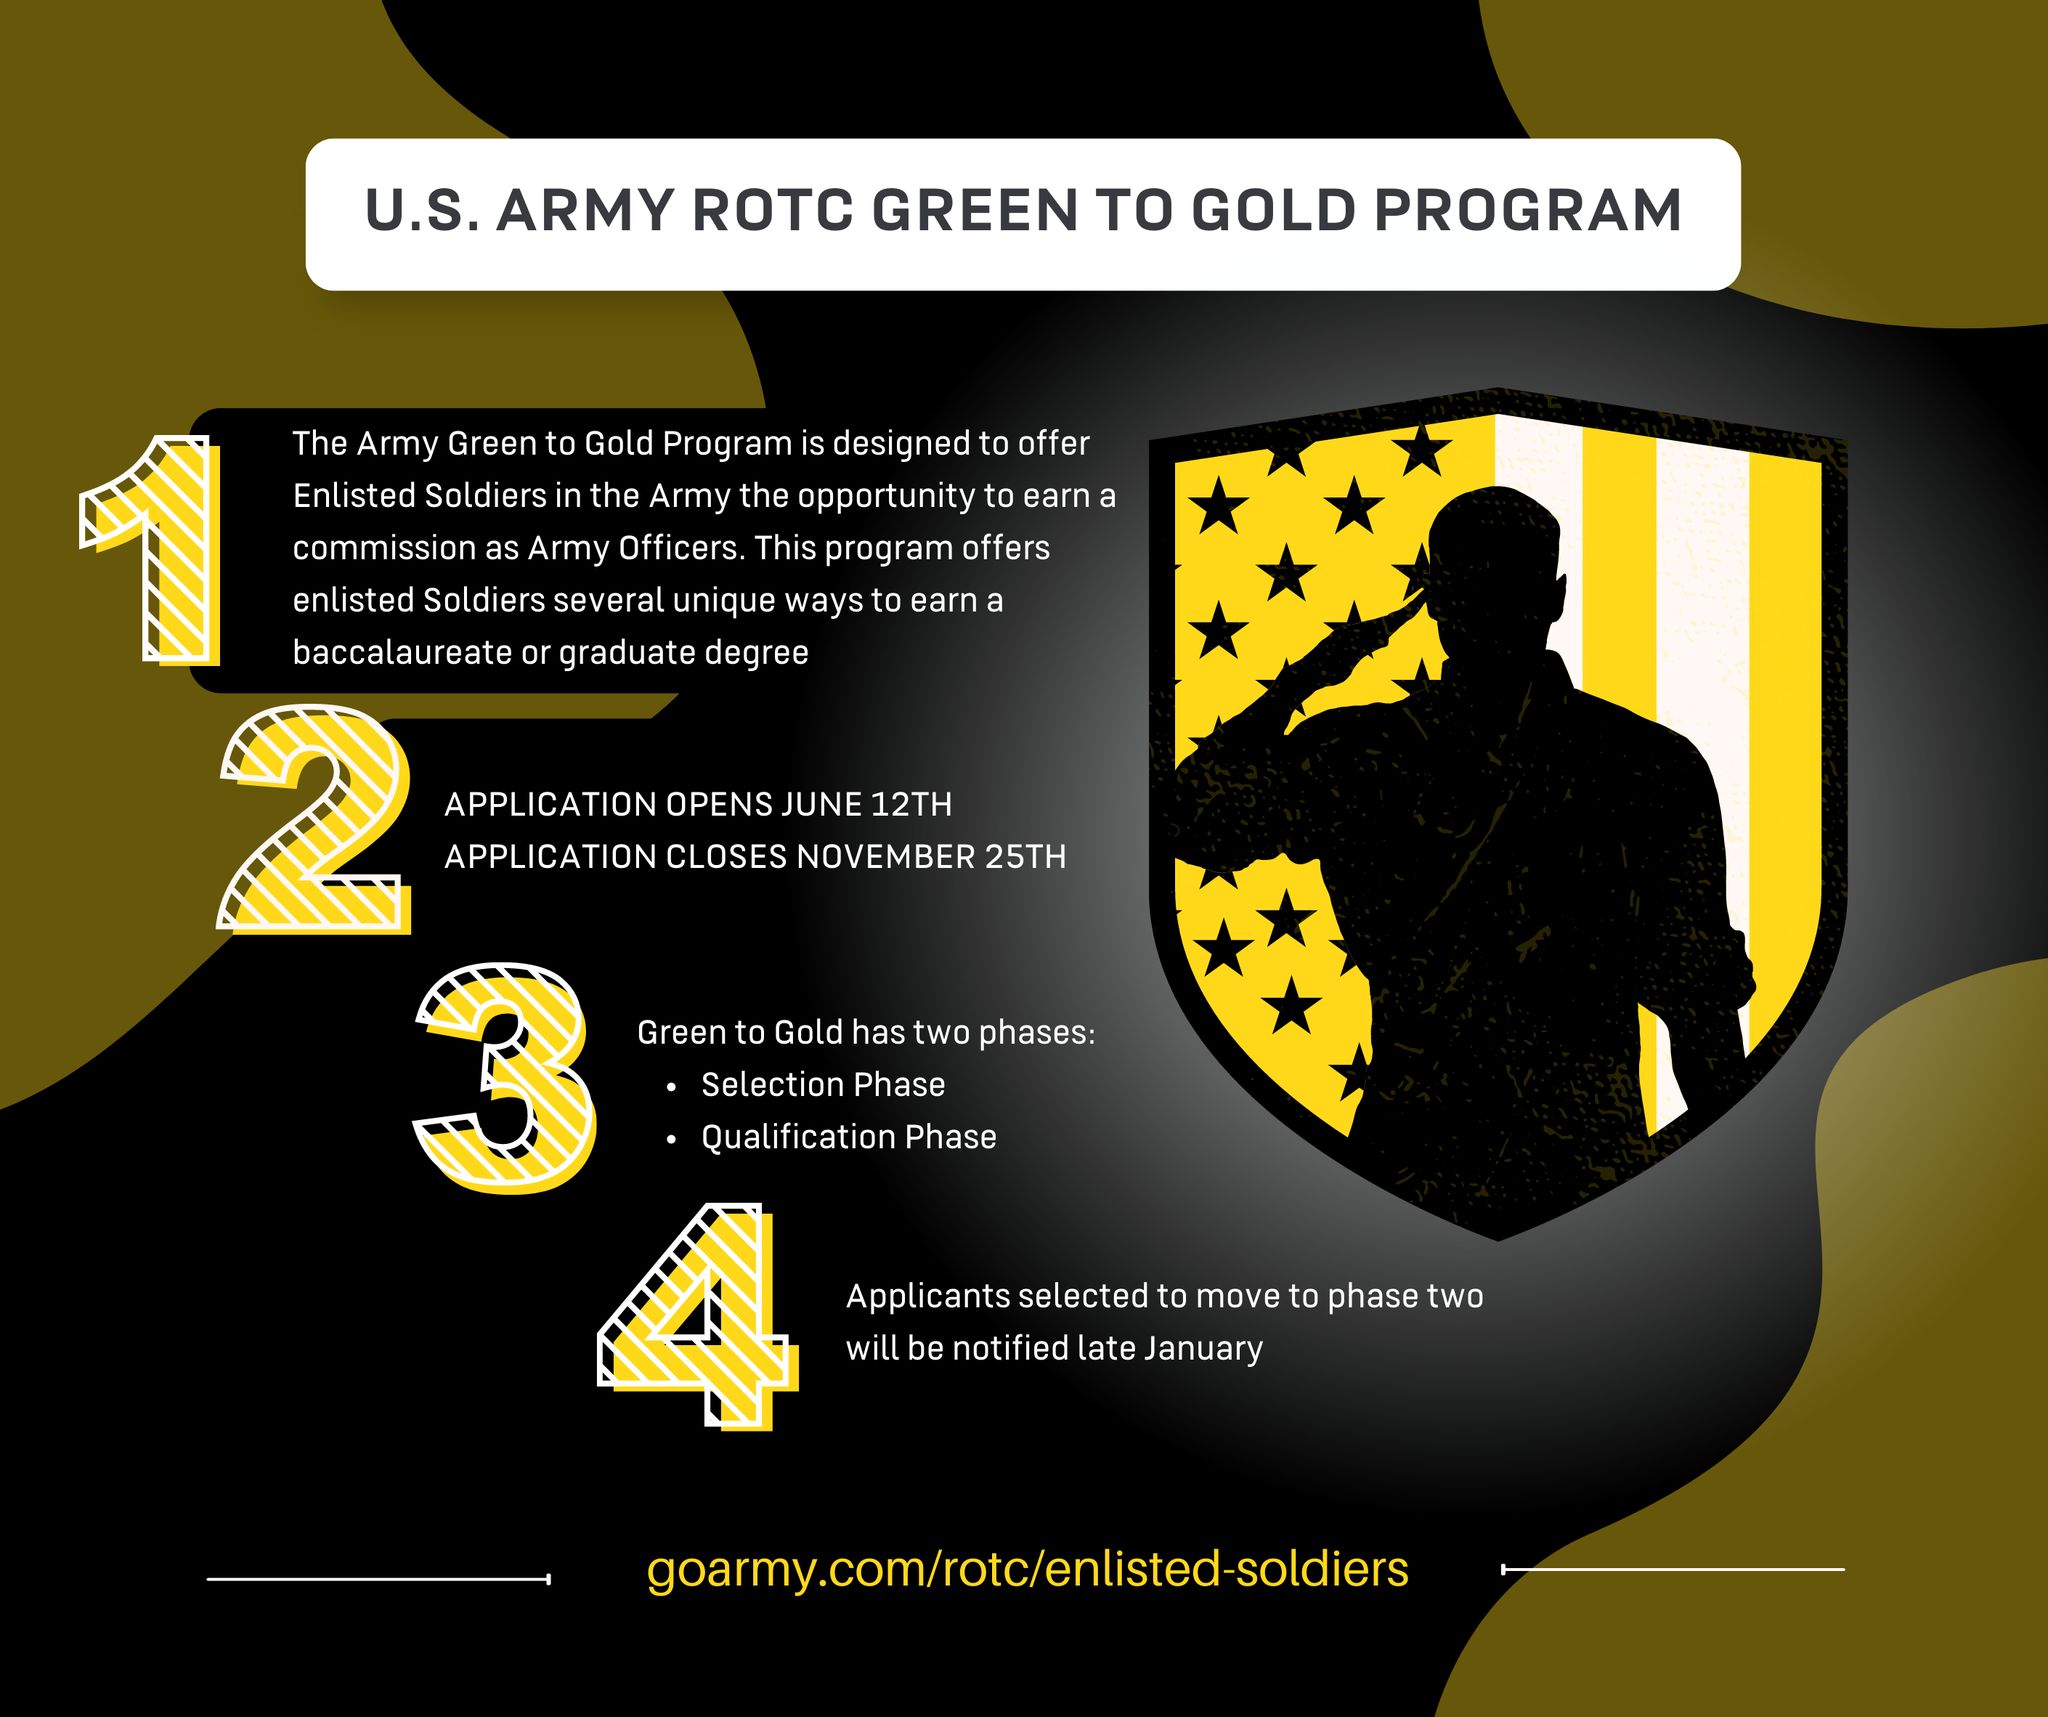 Go Army Infographic G2G